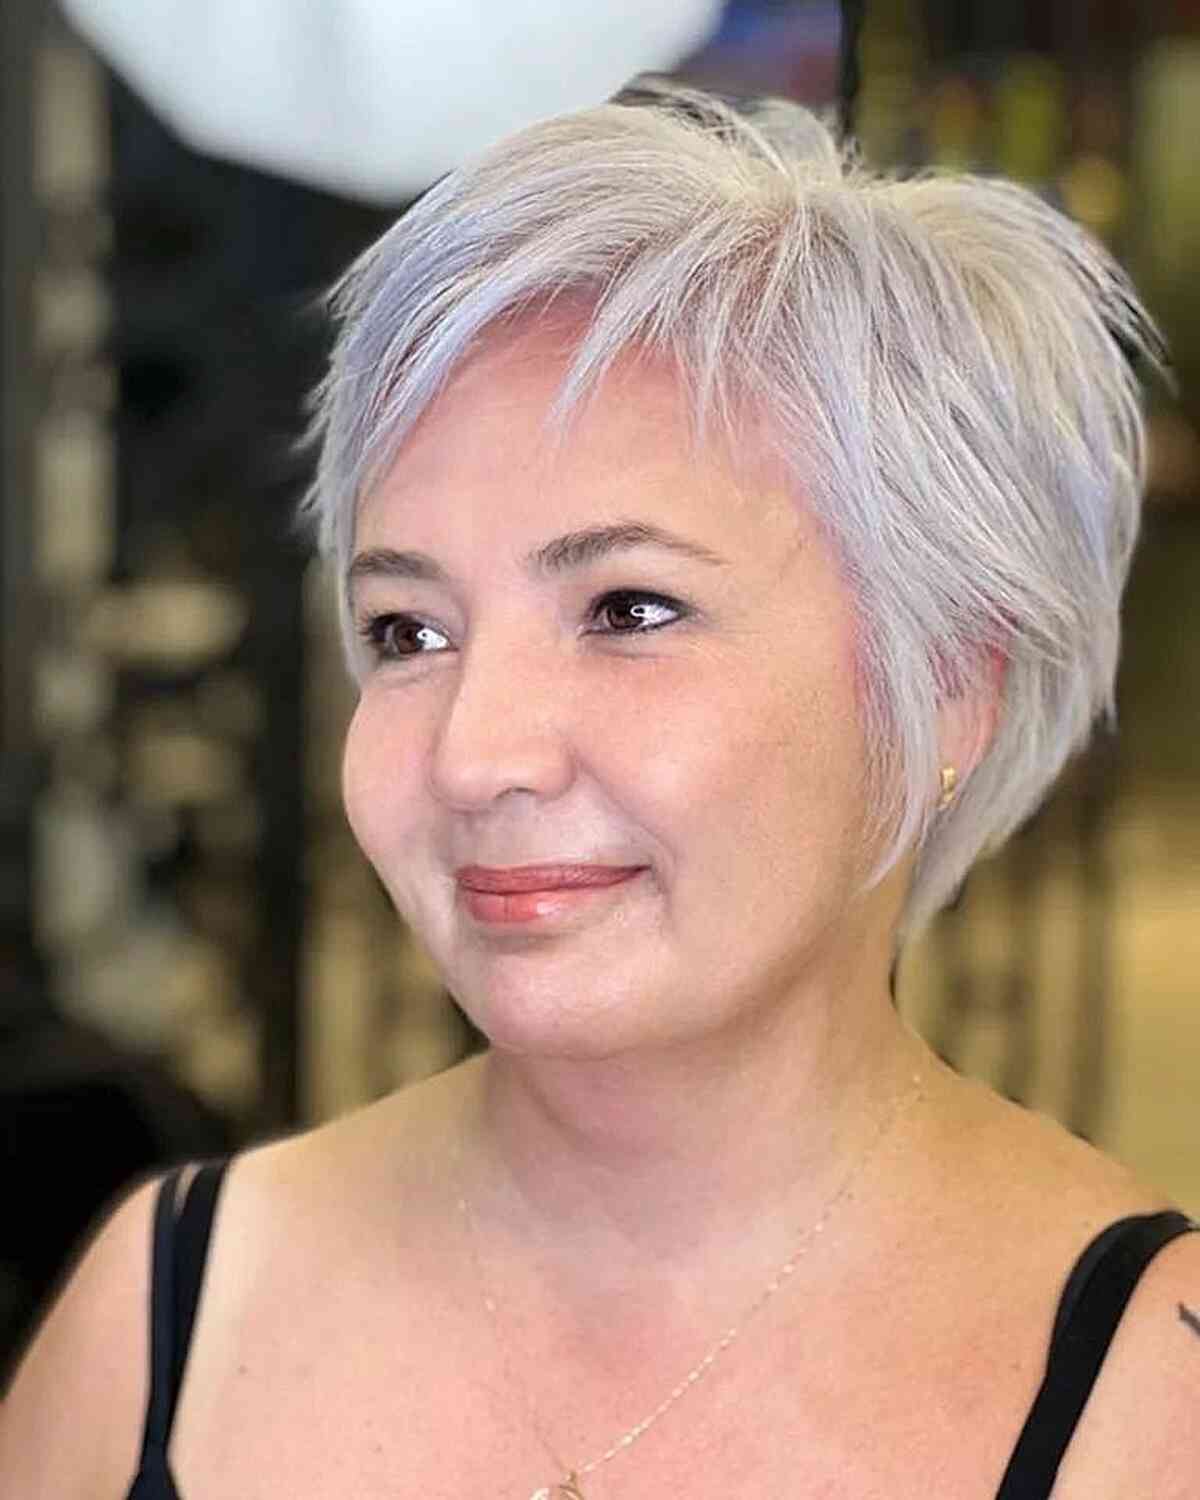 Naturally Silver Balayage Pixie Cut for Women Aged 50 with Thin Hair